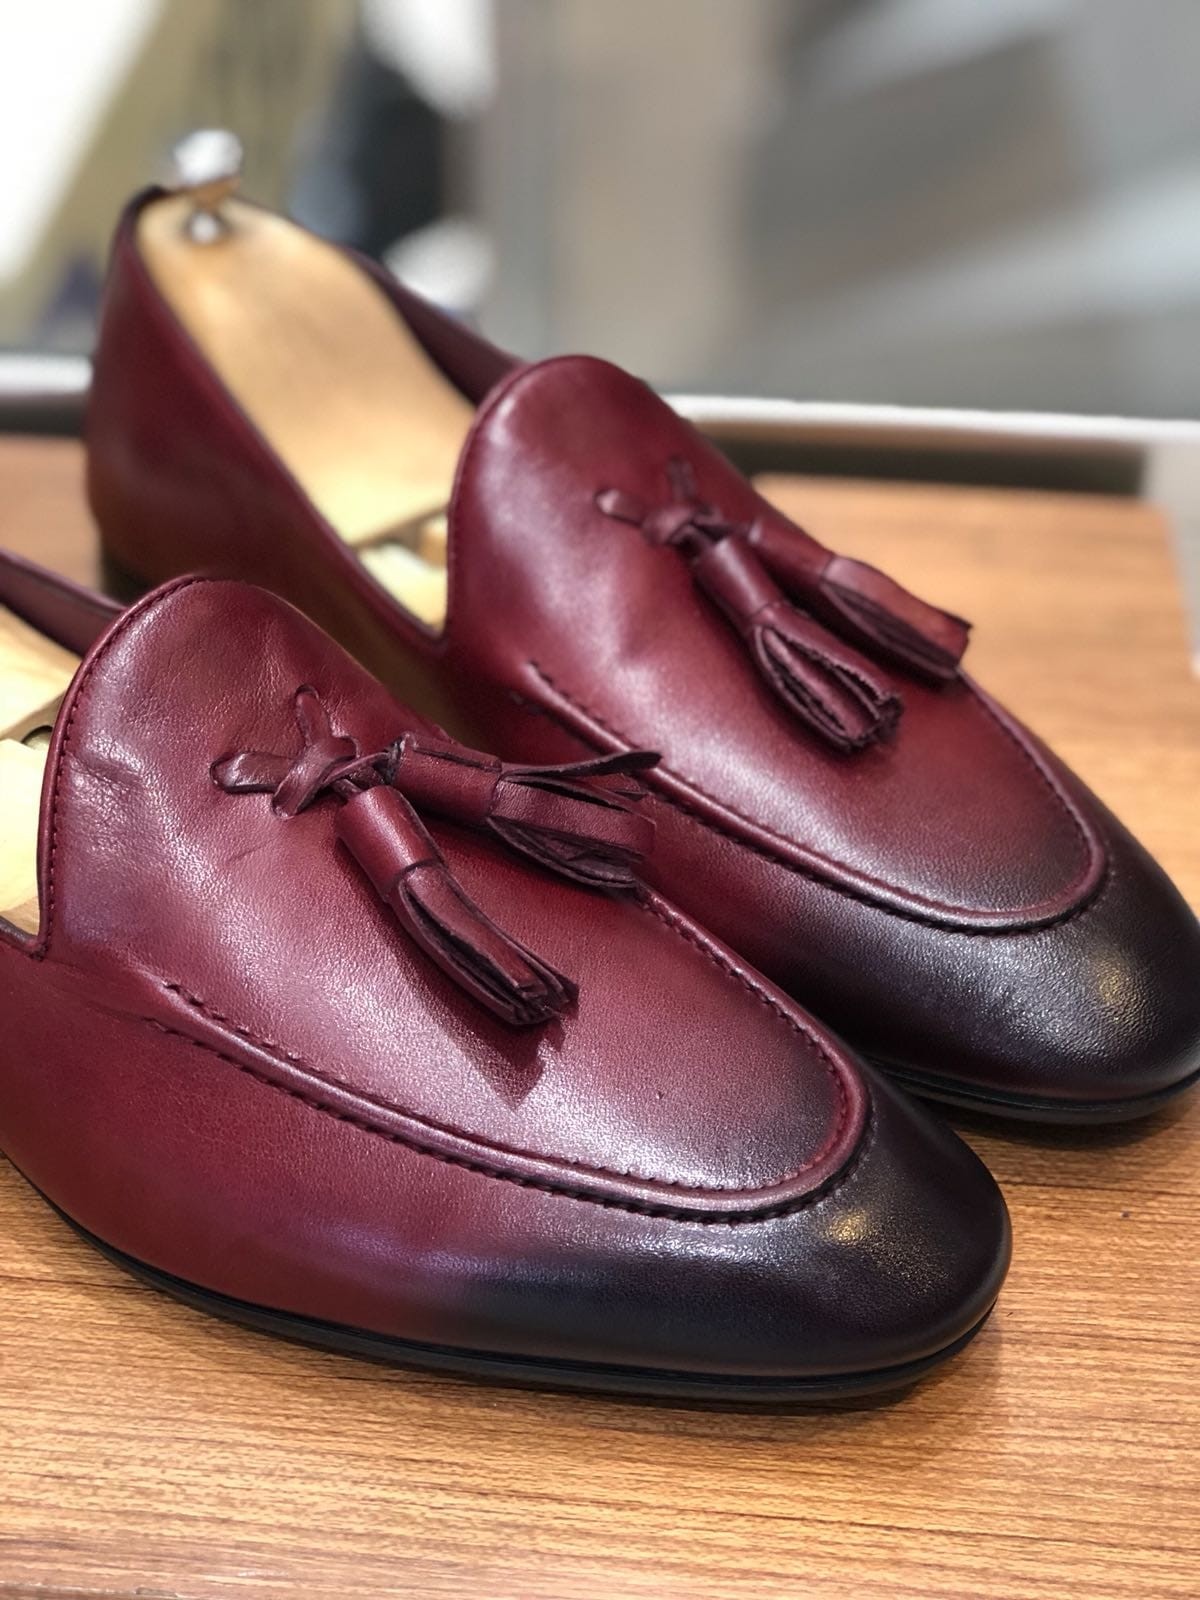 Buy Burgundy Tassel Loafer by Gentwith.com with Free Shipping